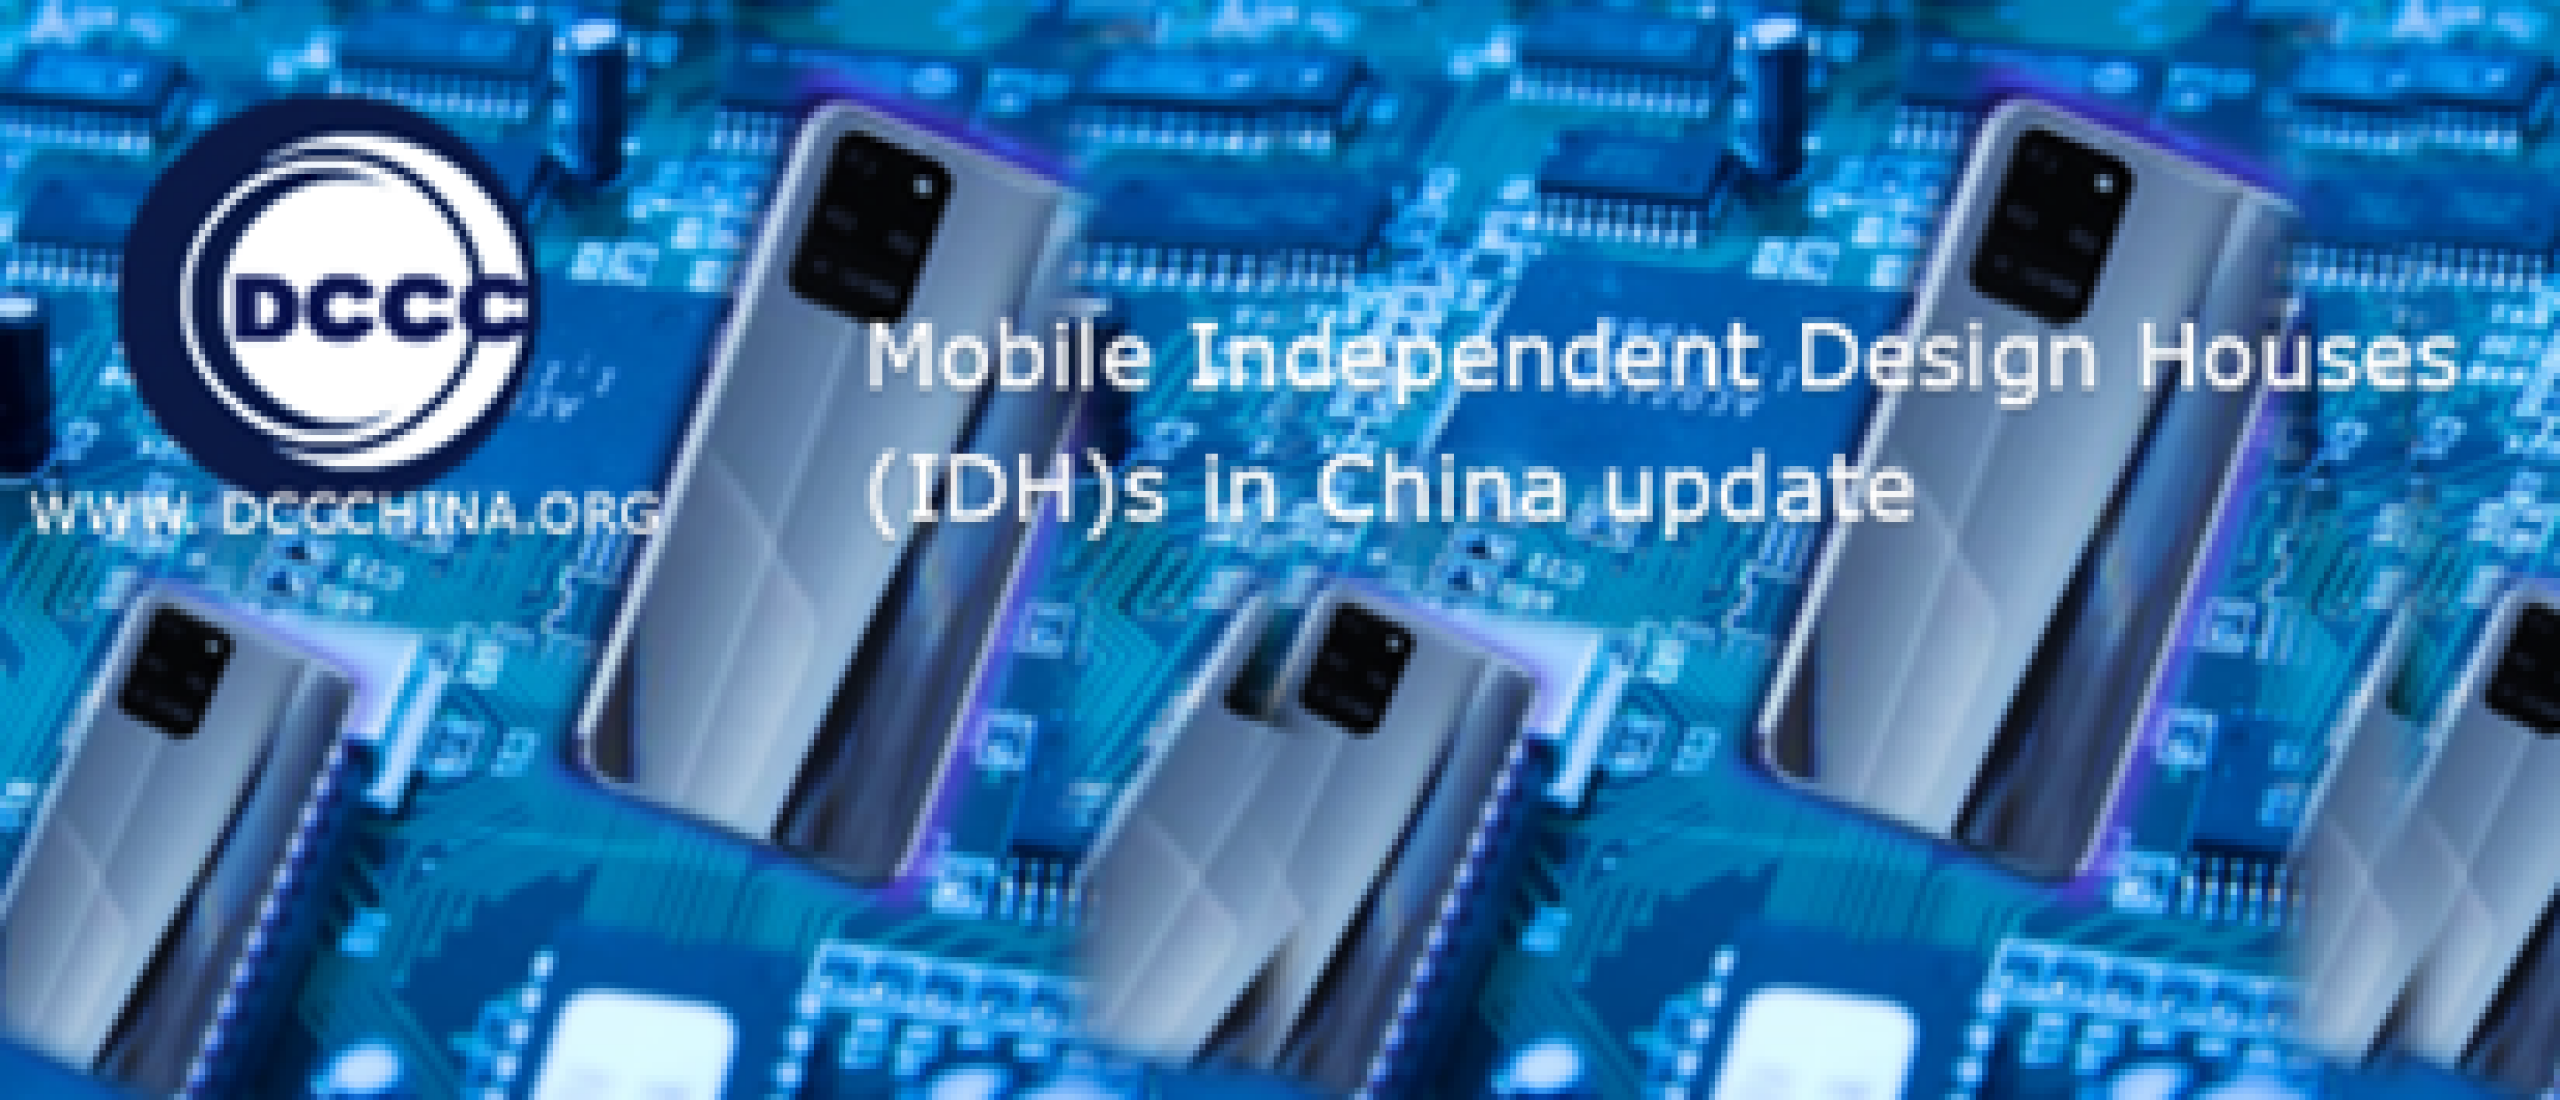 Mobile Independent Design Houses (IDH)s in China update